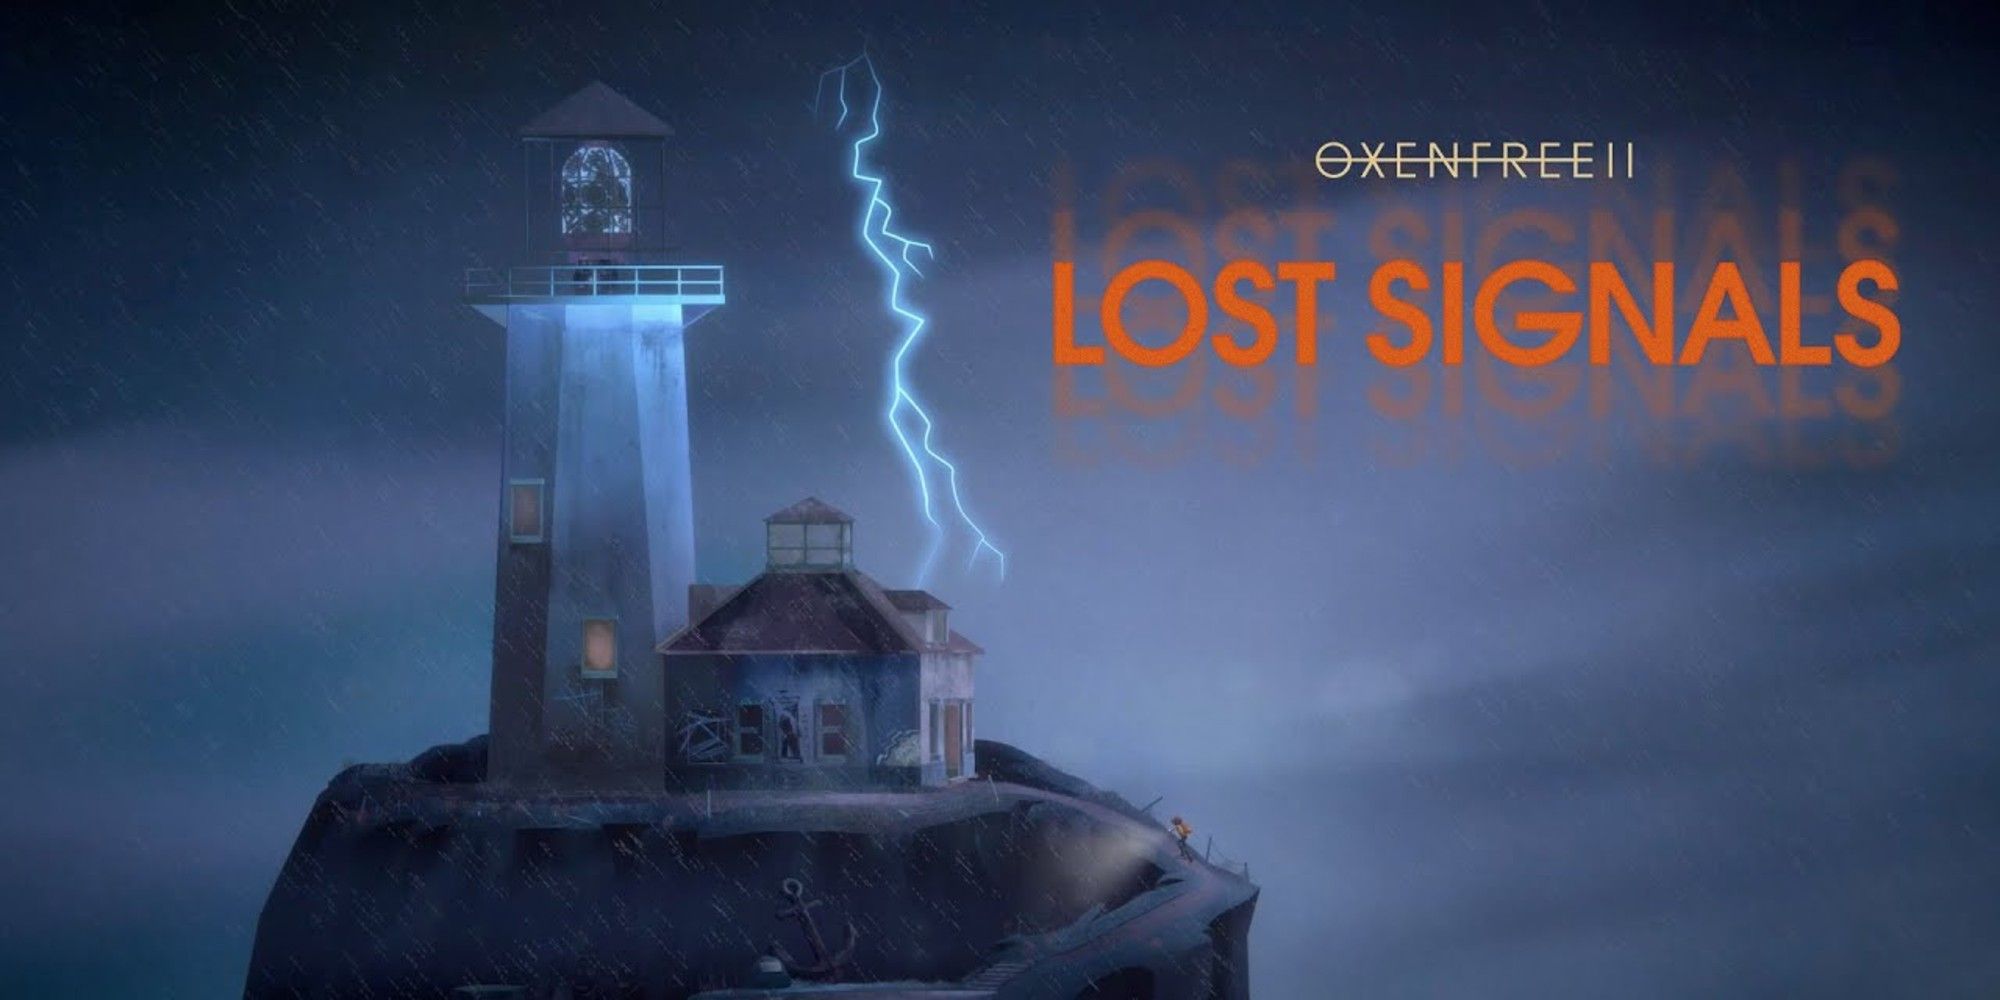 Oxenfree II Lost Signal